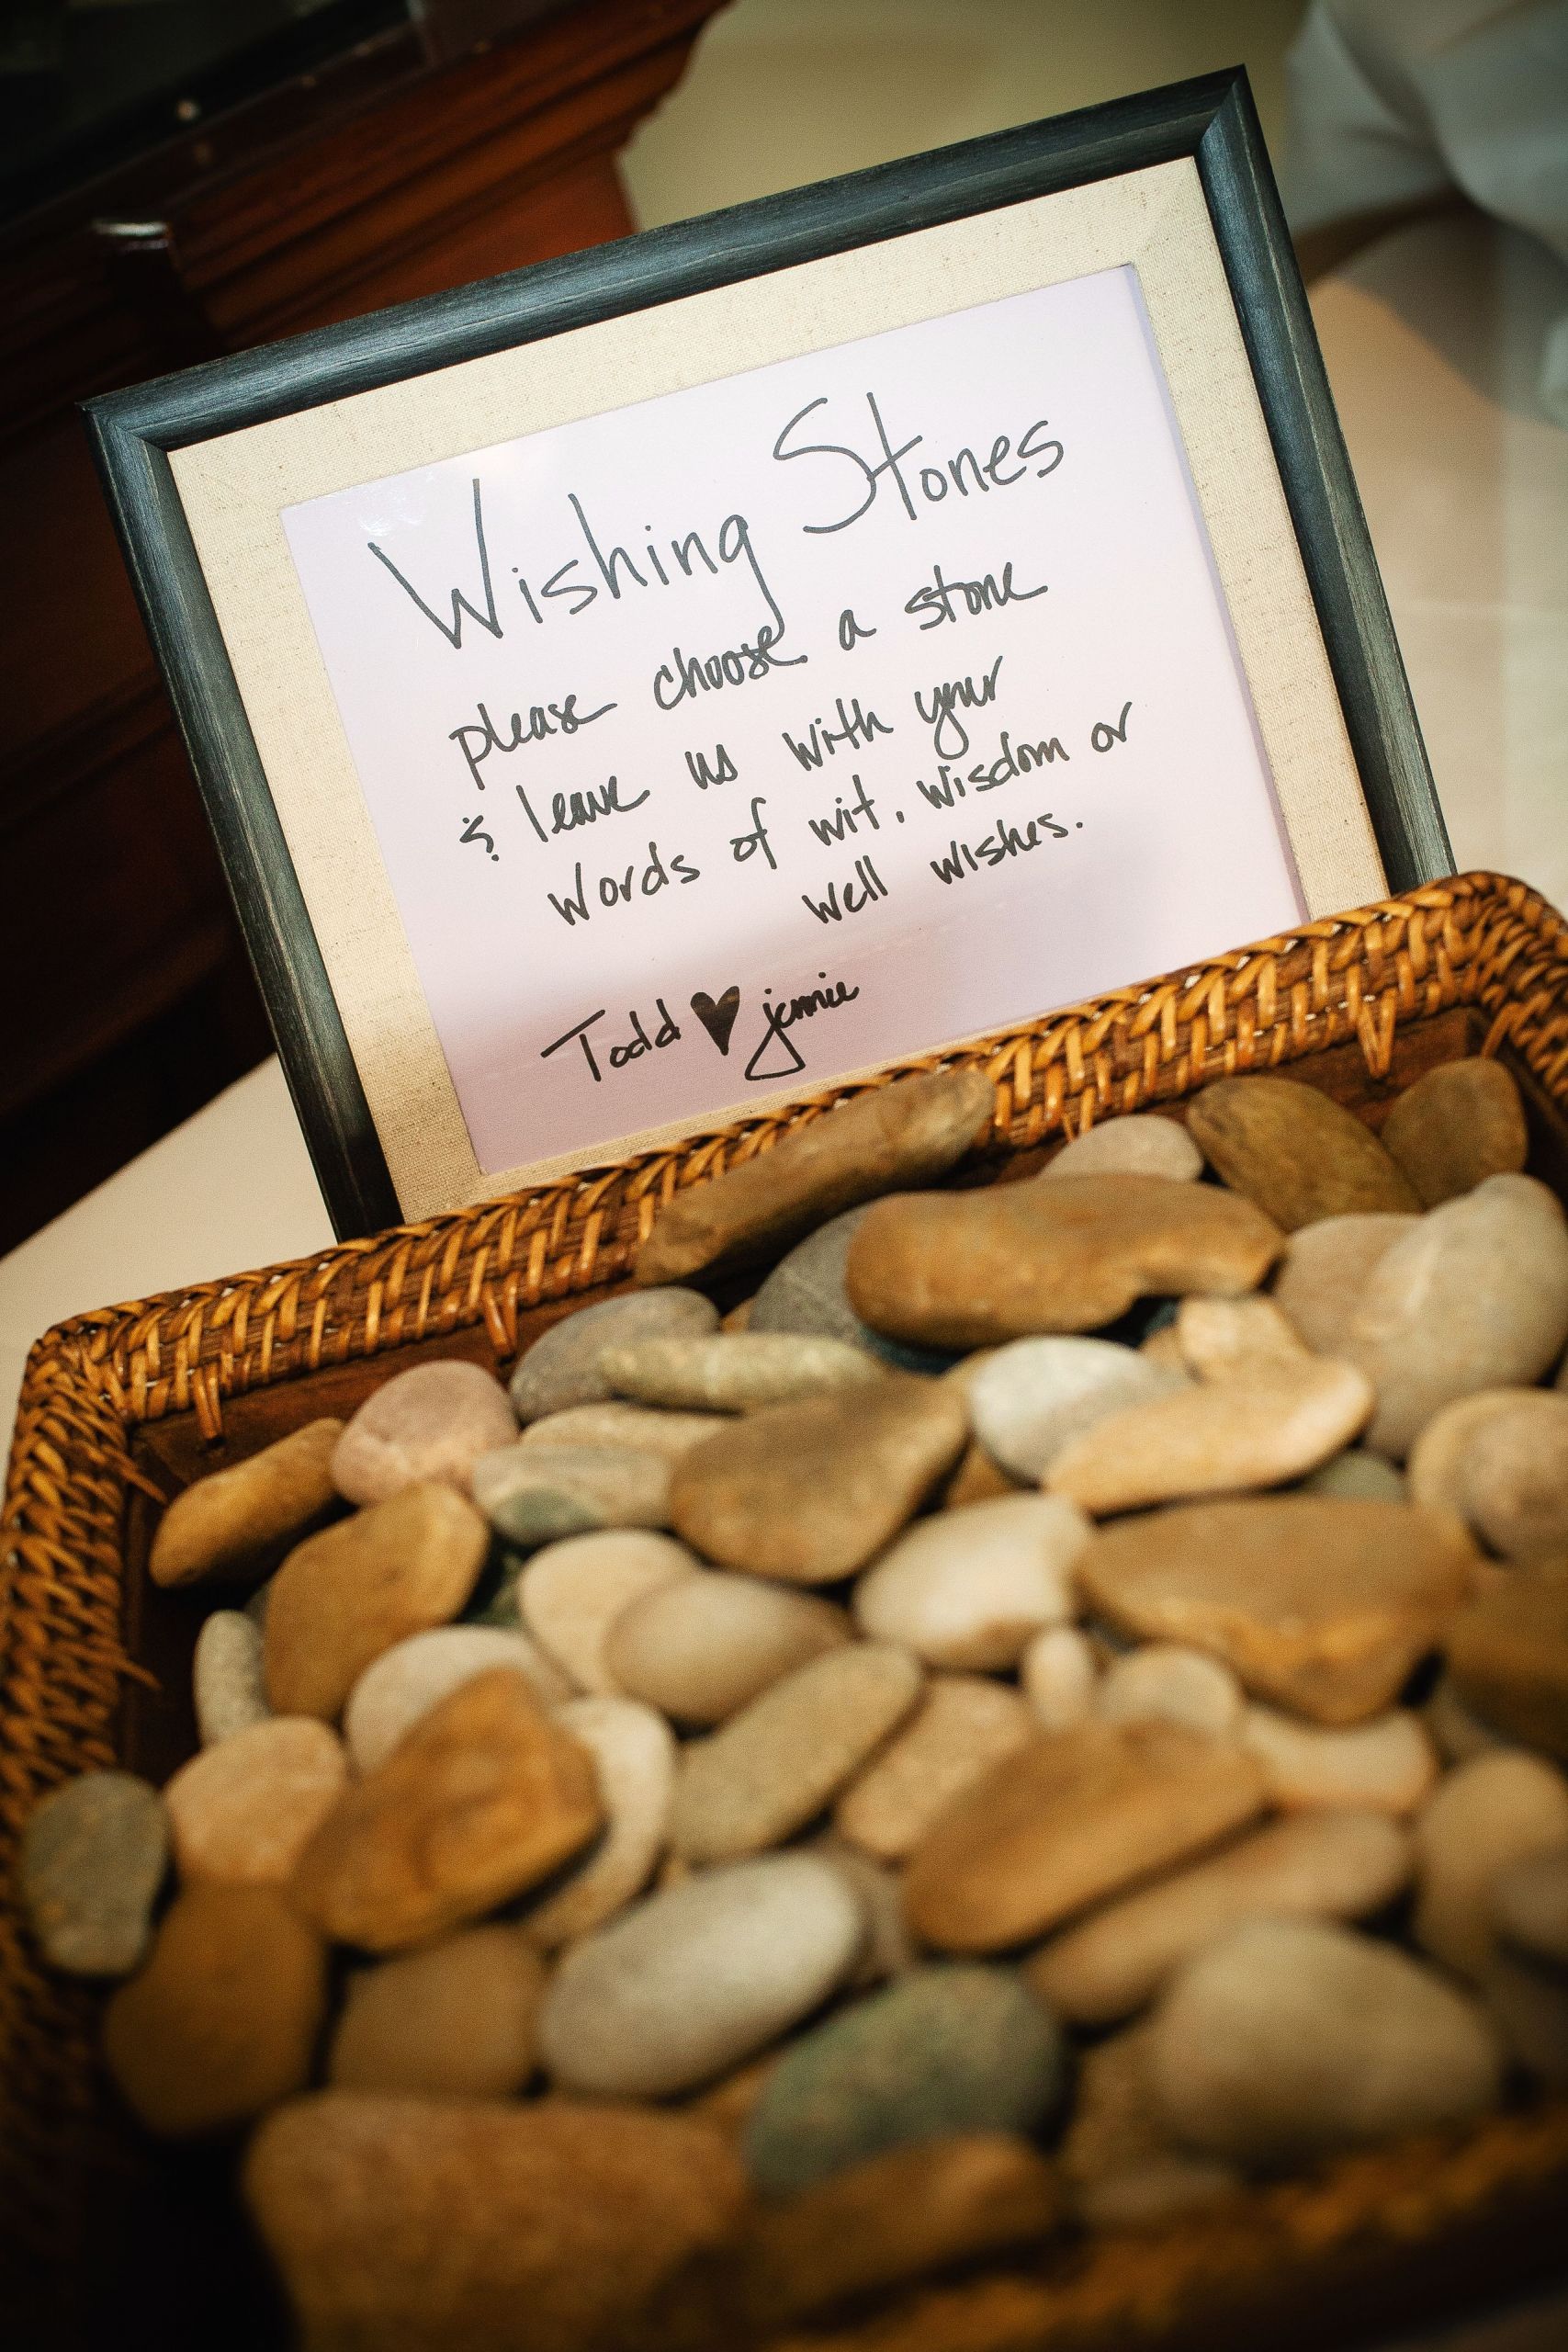 Stone Wedding Guest Book
 A creative twist for a guest book Wishing Stones for